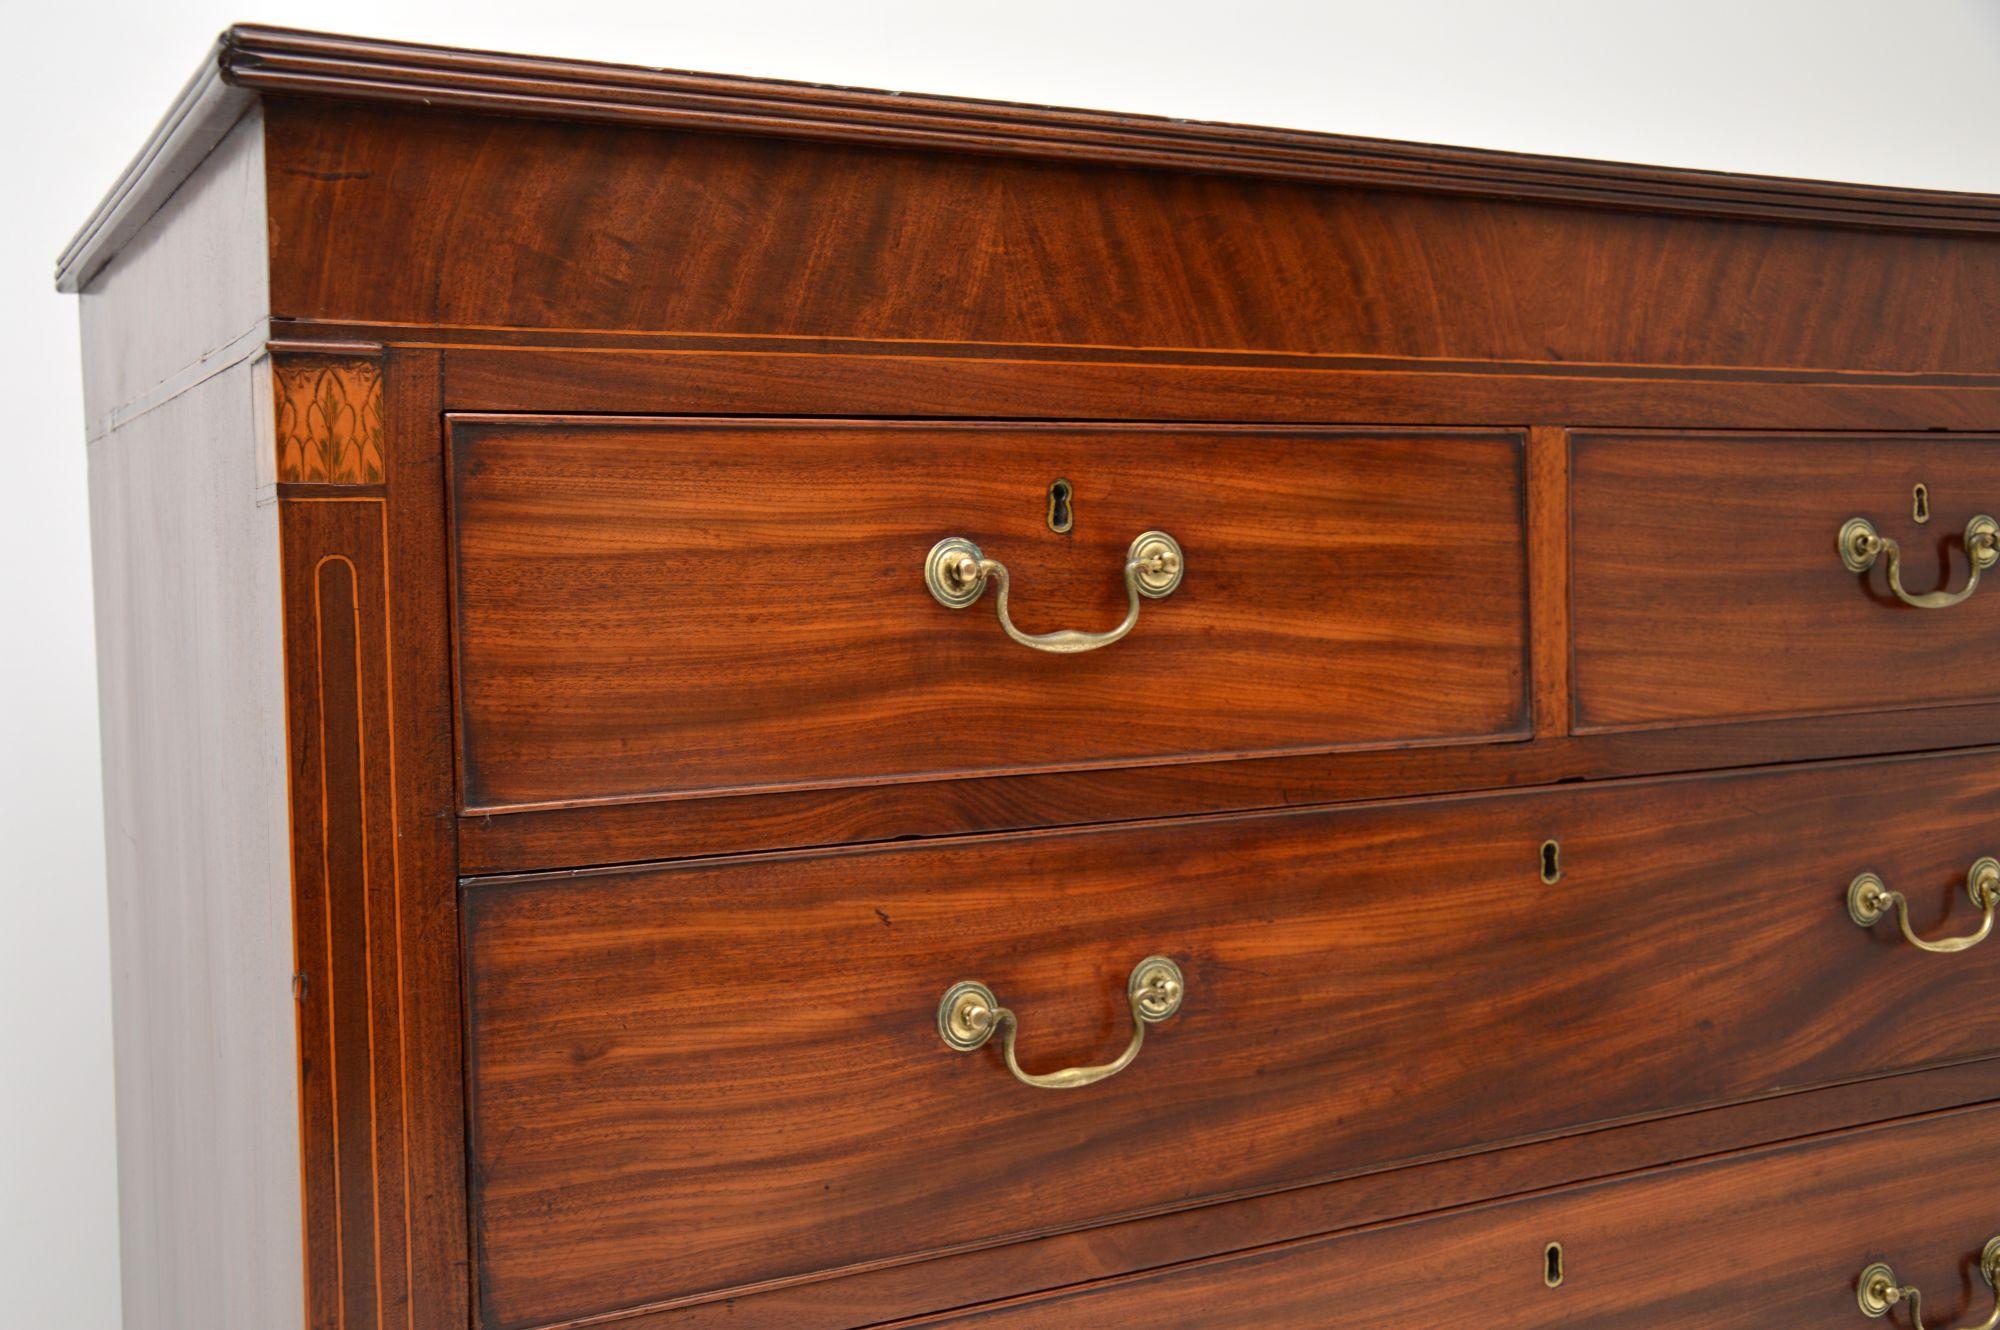 Late 18th Century Antique Georgian Inlaid Mahogany Chest of Drawers